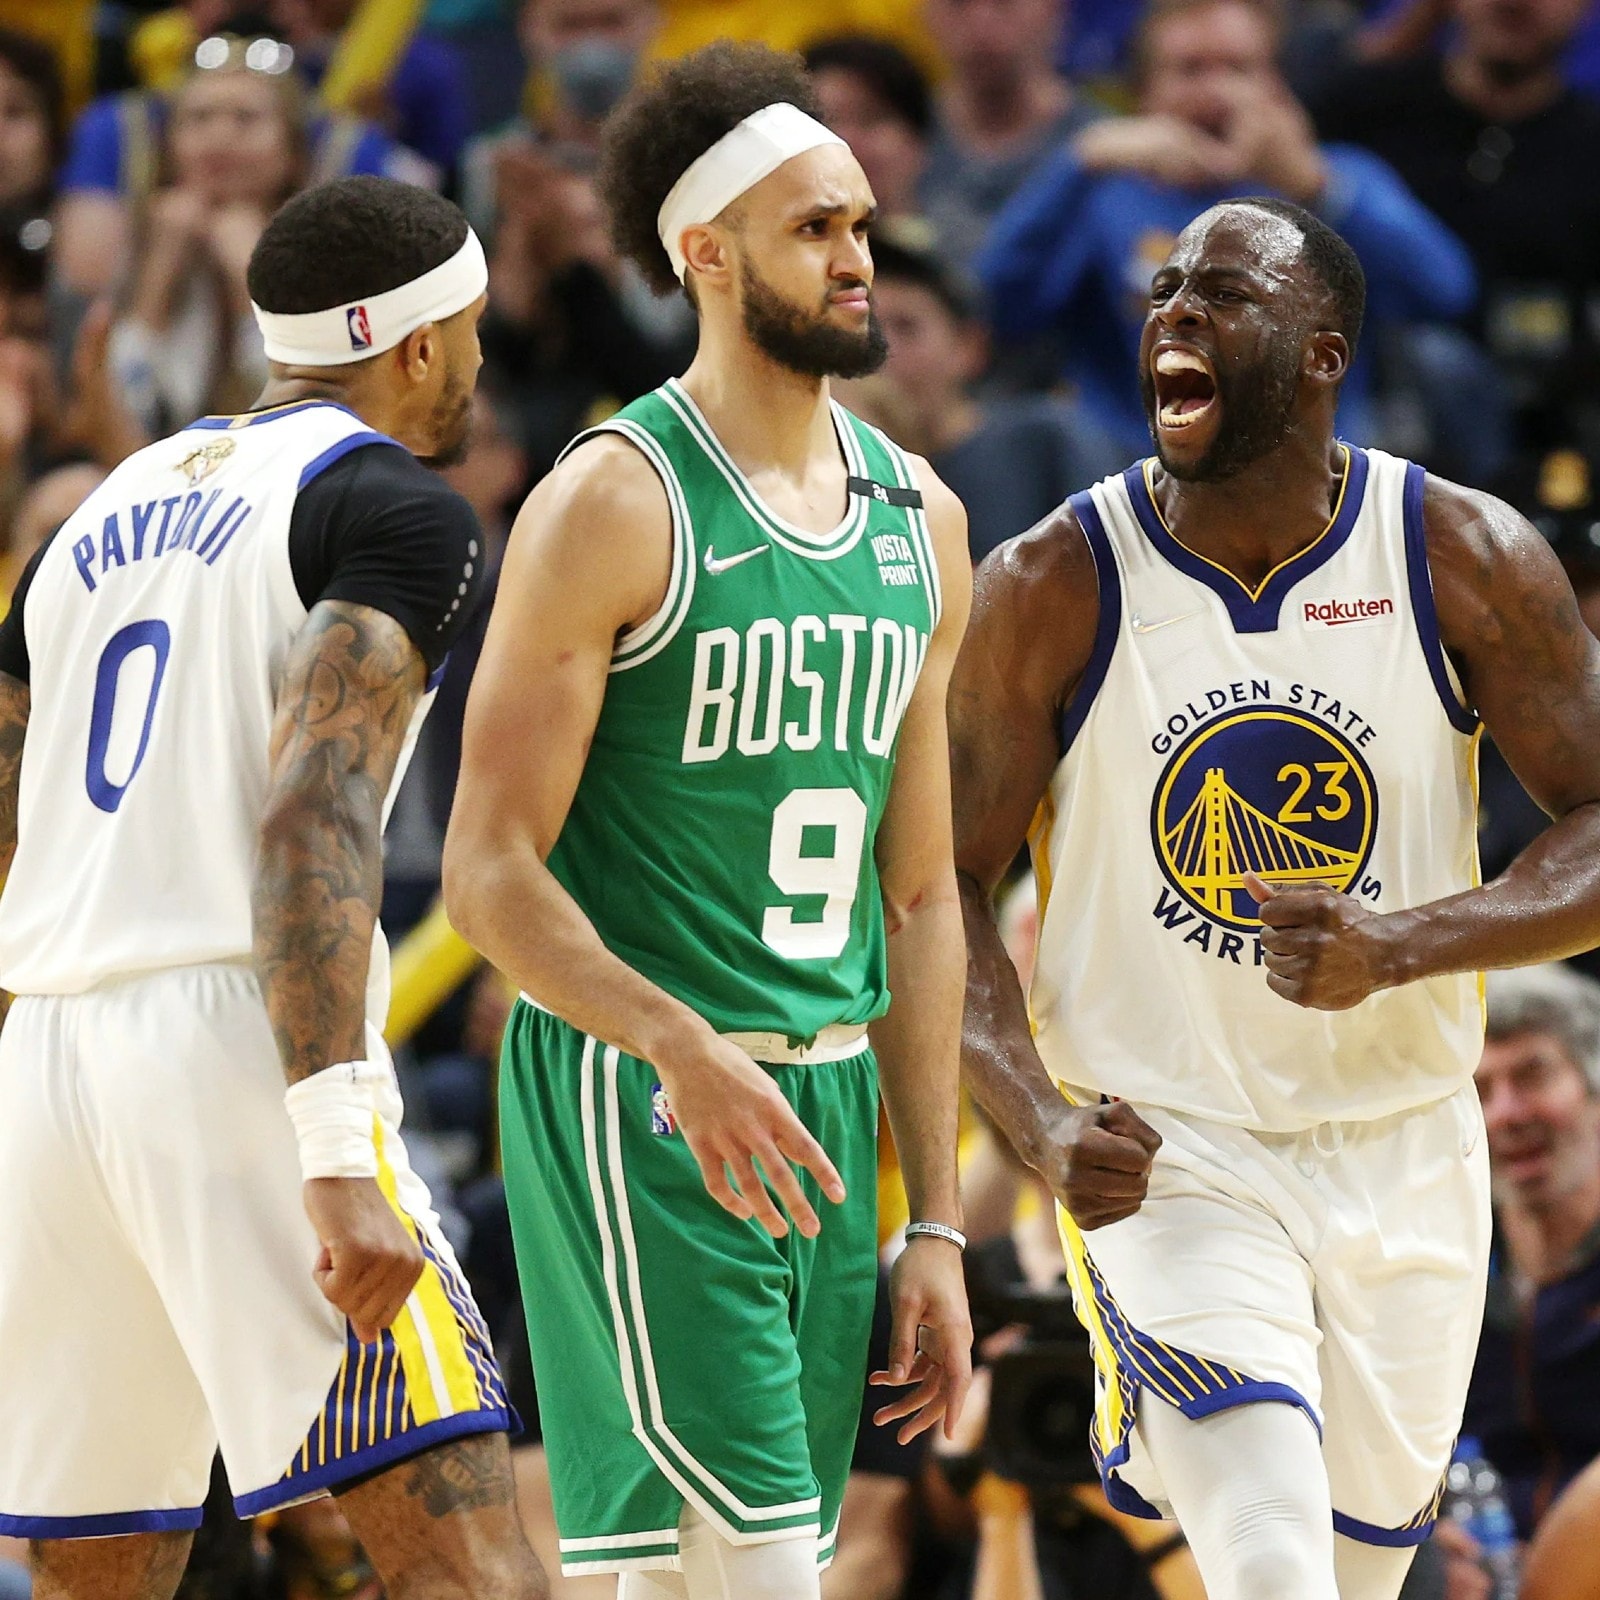 How to watch Golden State Warriors vs. Boston Celtics Game 6: NBA